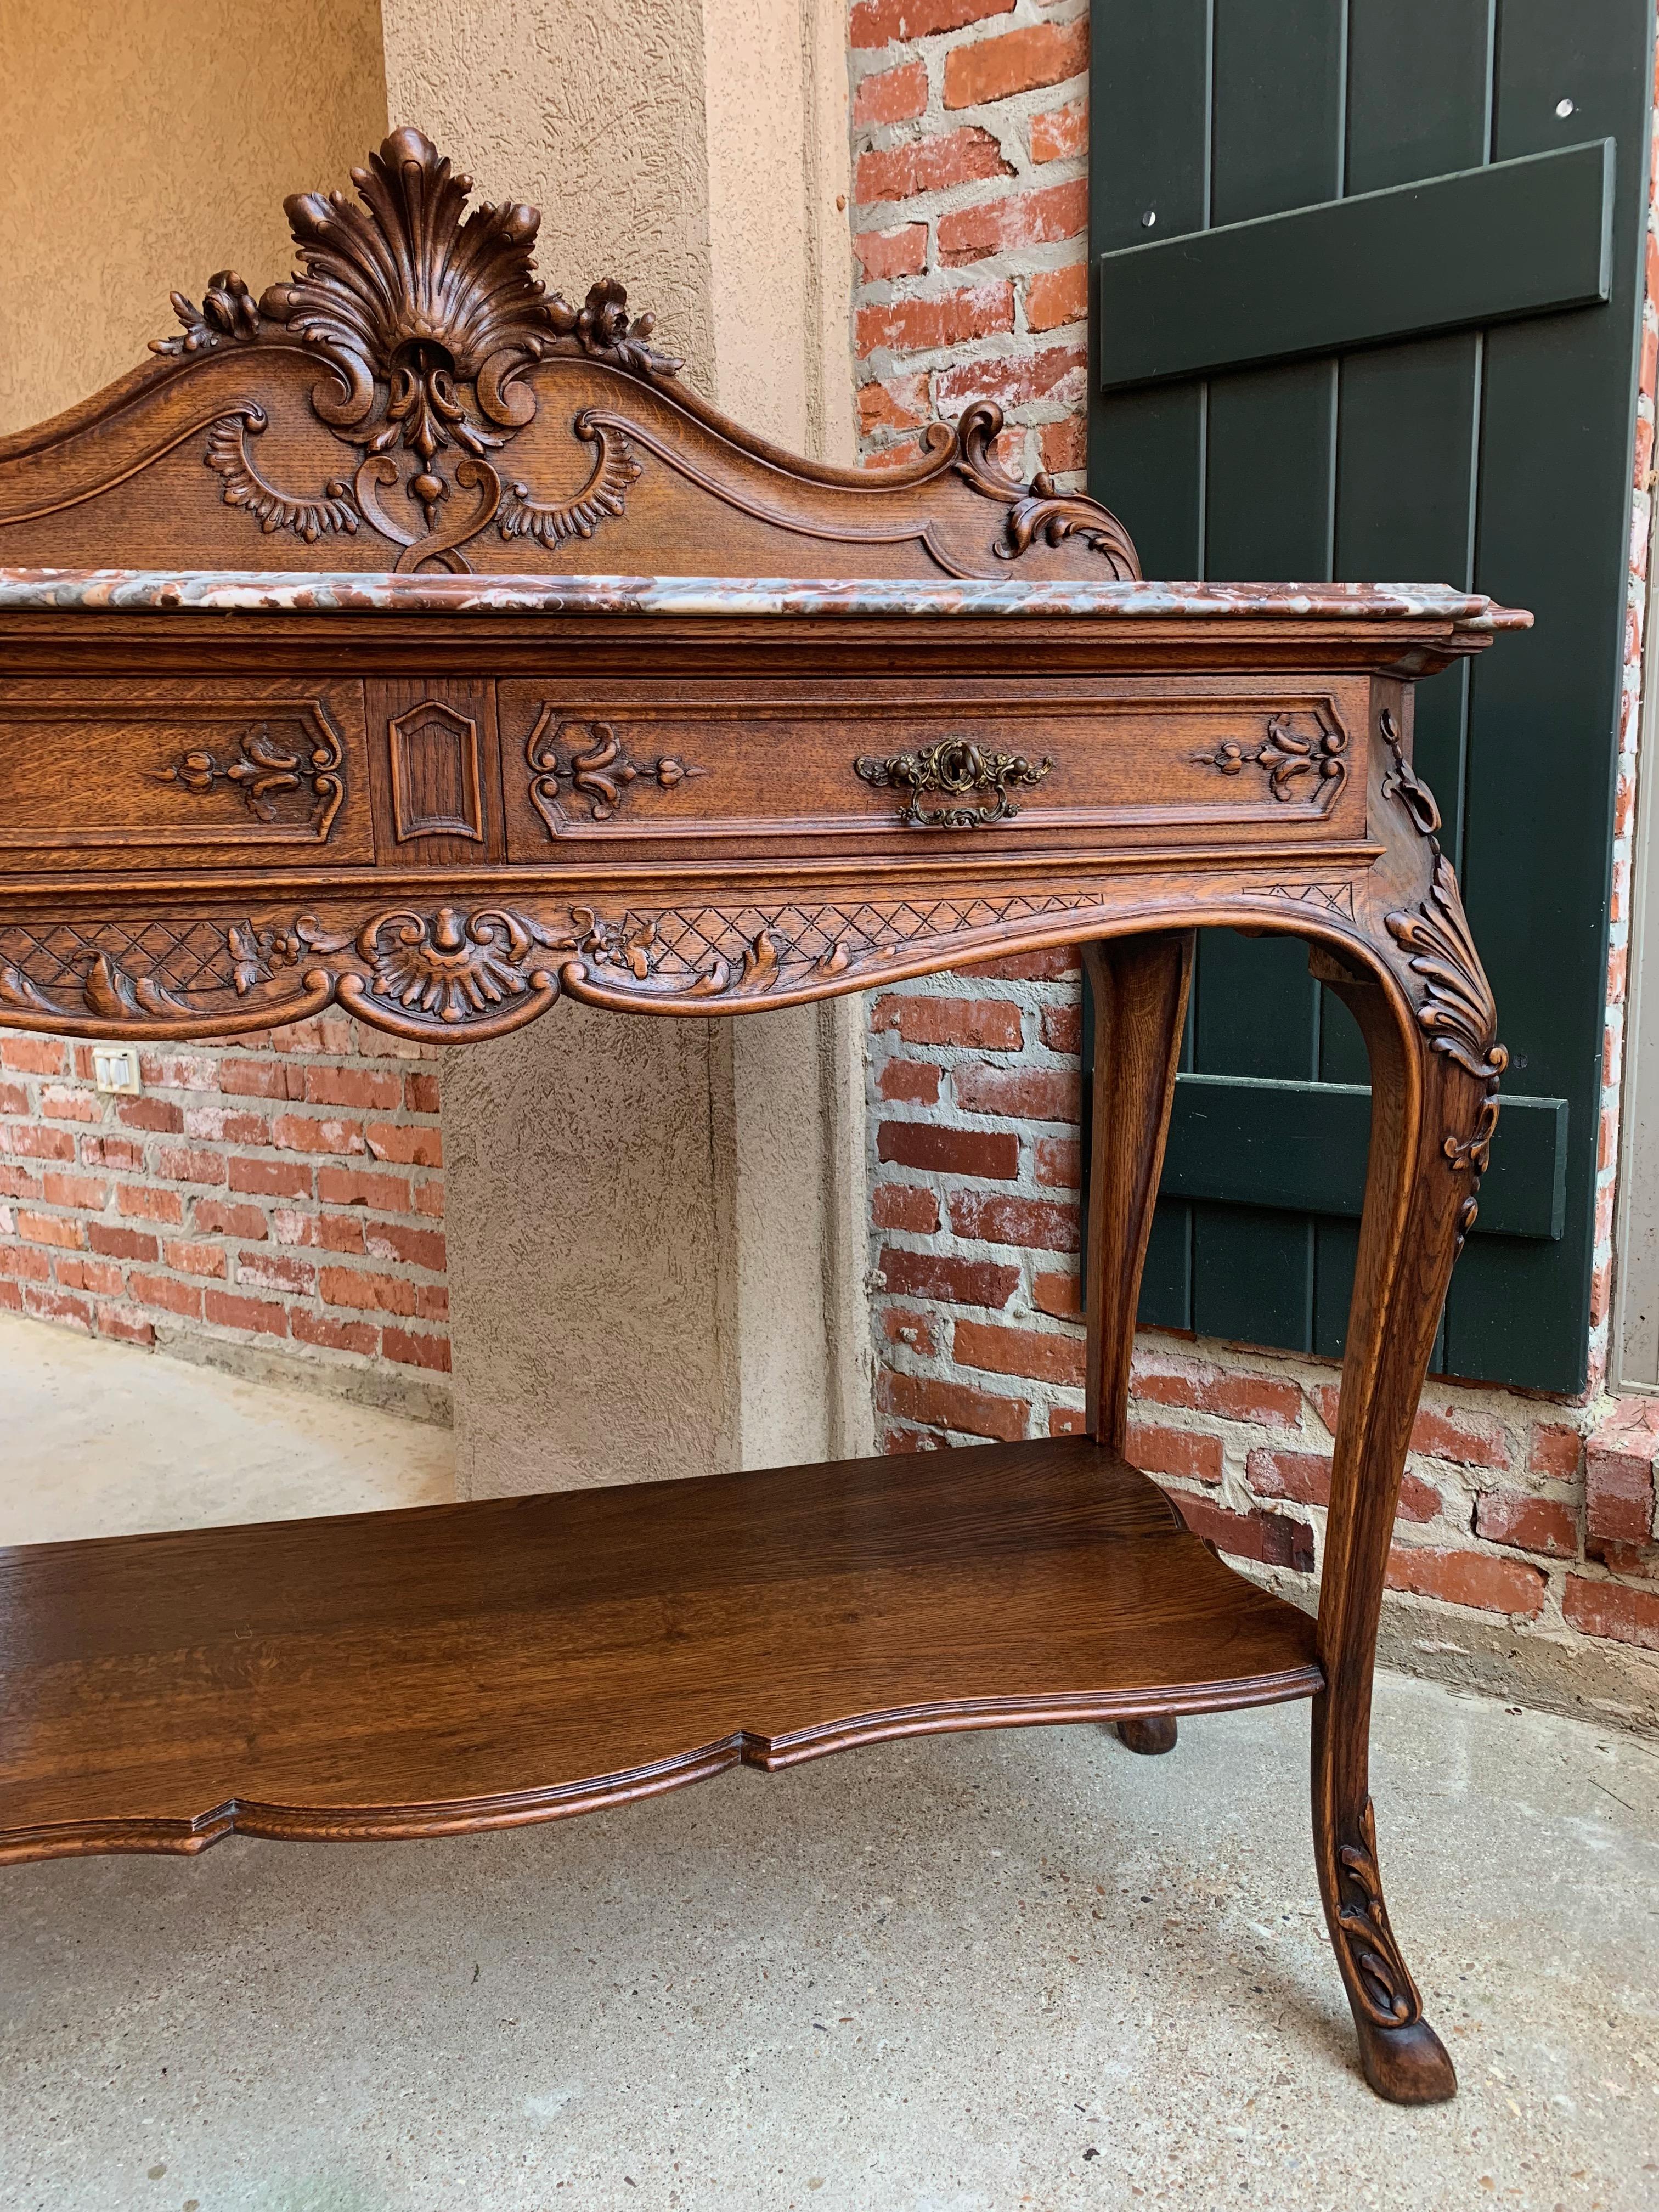 Direct from France, a lovely antique French carved oak sideboard or buffet in classic Louis XV style.
~Beautiful French carvings throughout, with a tall raised paneled back with dimensional French cartouche center with serpentine edges~
~Two